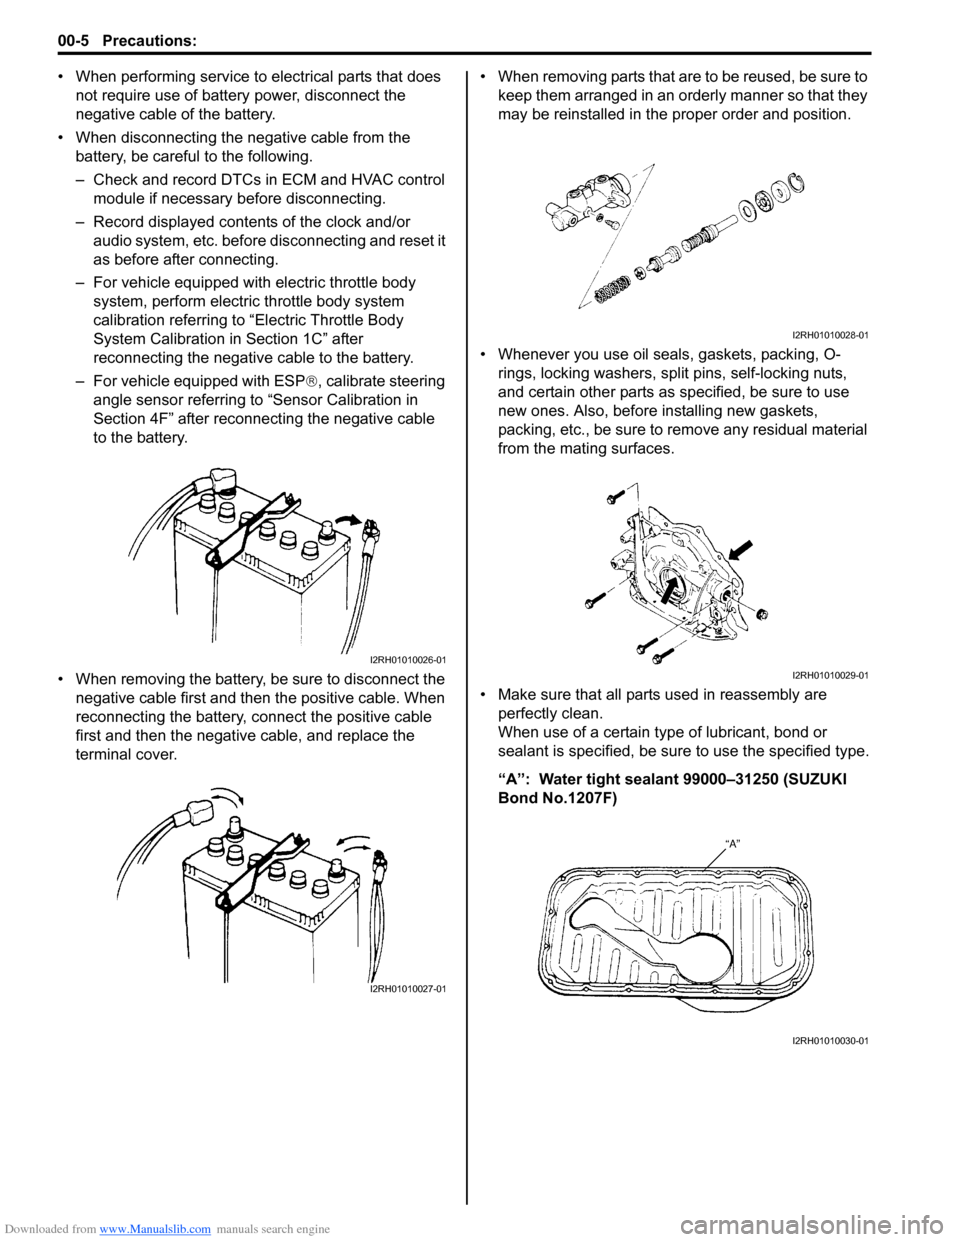 SUZUKI SWIFT 2006 2.G Service Workshop Manual Downloaded from www.Manualslib.com manuals search engine 00-5 Precautions: 
• When performing service to electrical parts that does not require use of battery power, disconnect the 
negative cable o